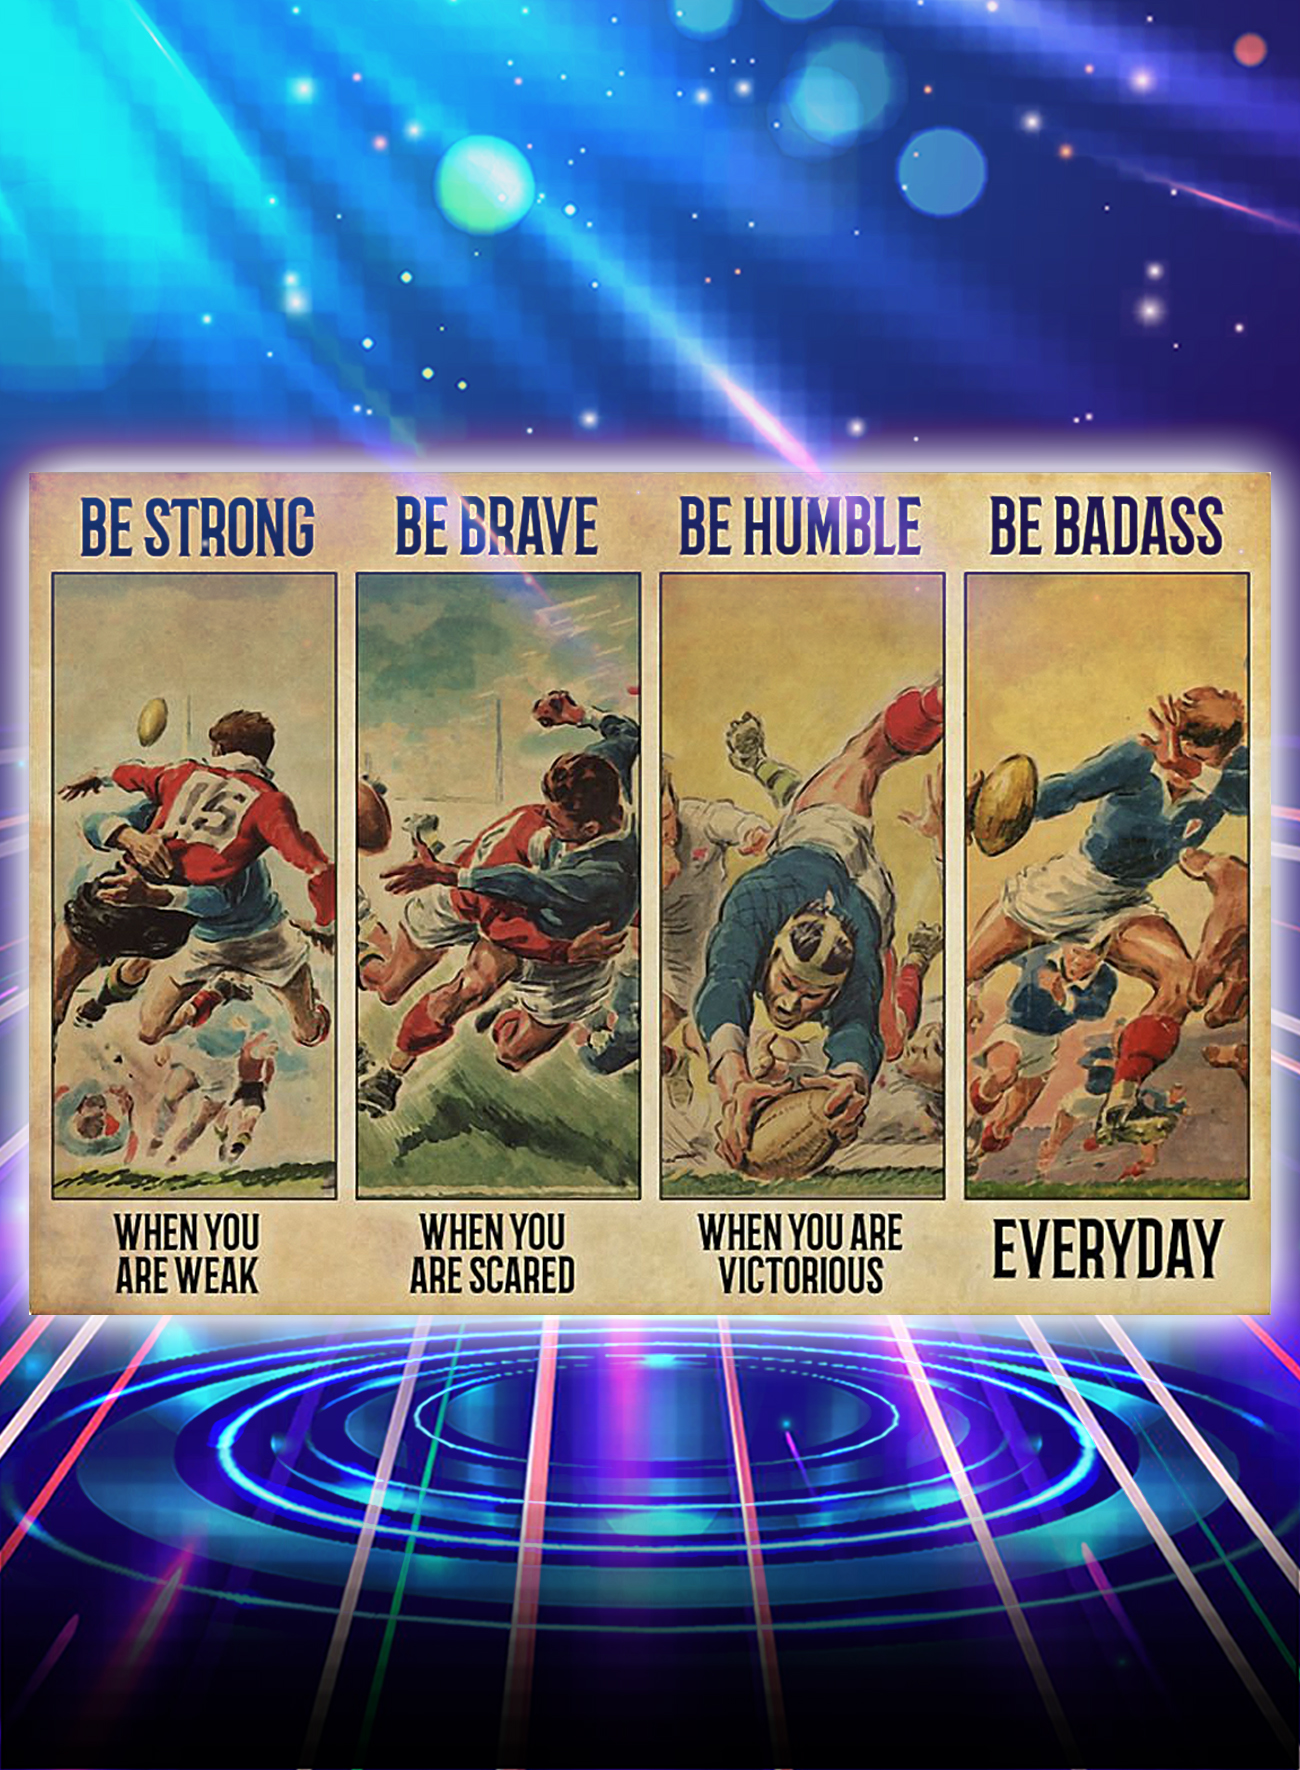 Rugby be strong be brave be humble be badass poster - A4